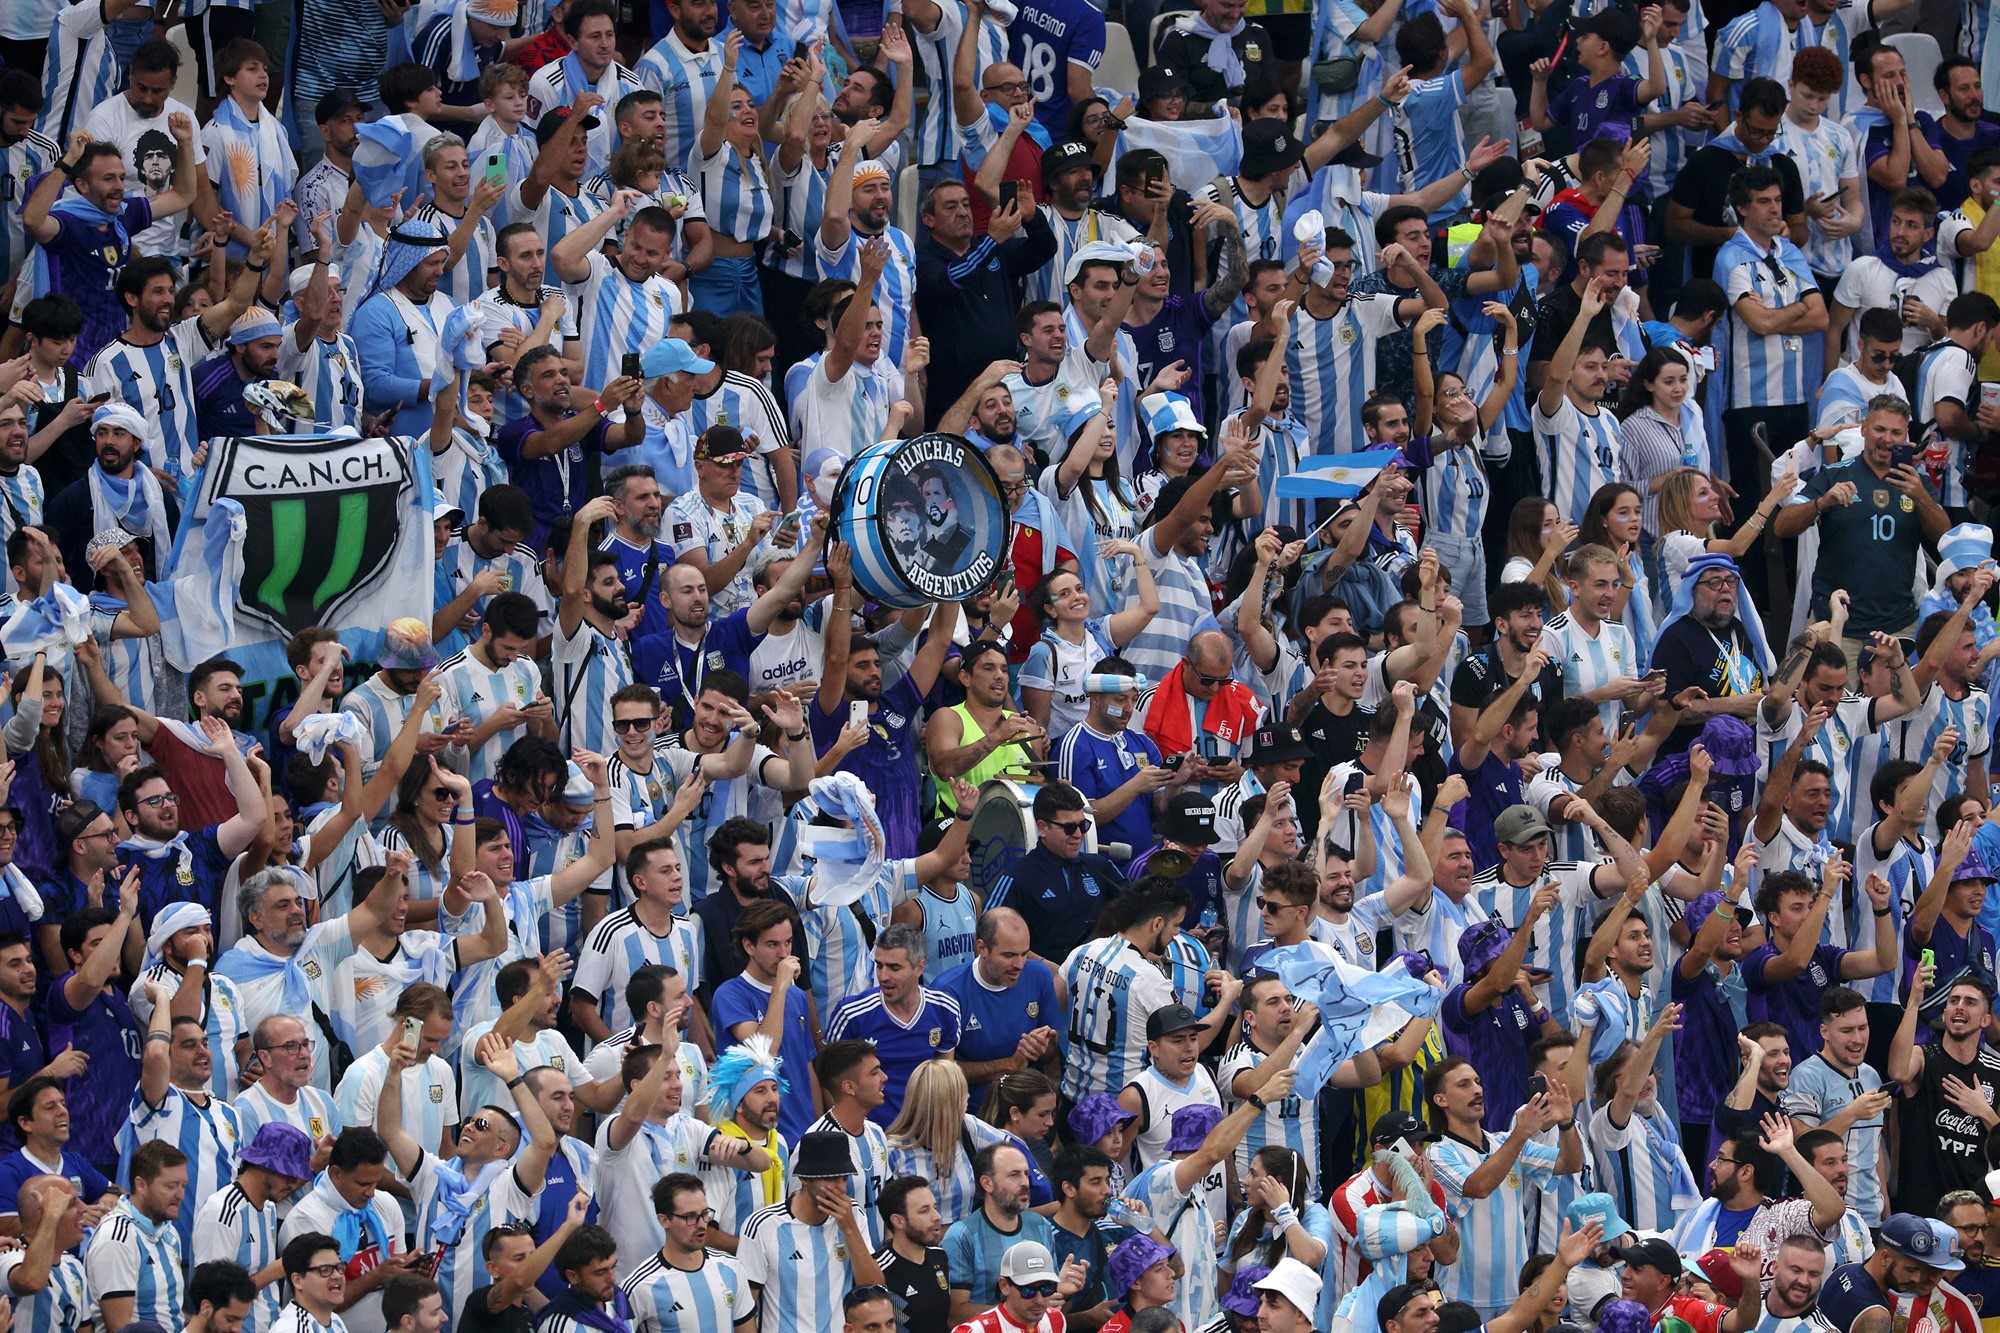 Argentina fans in the crows